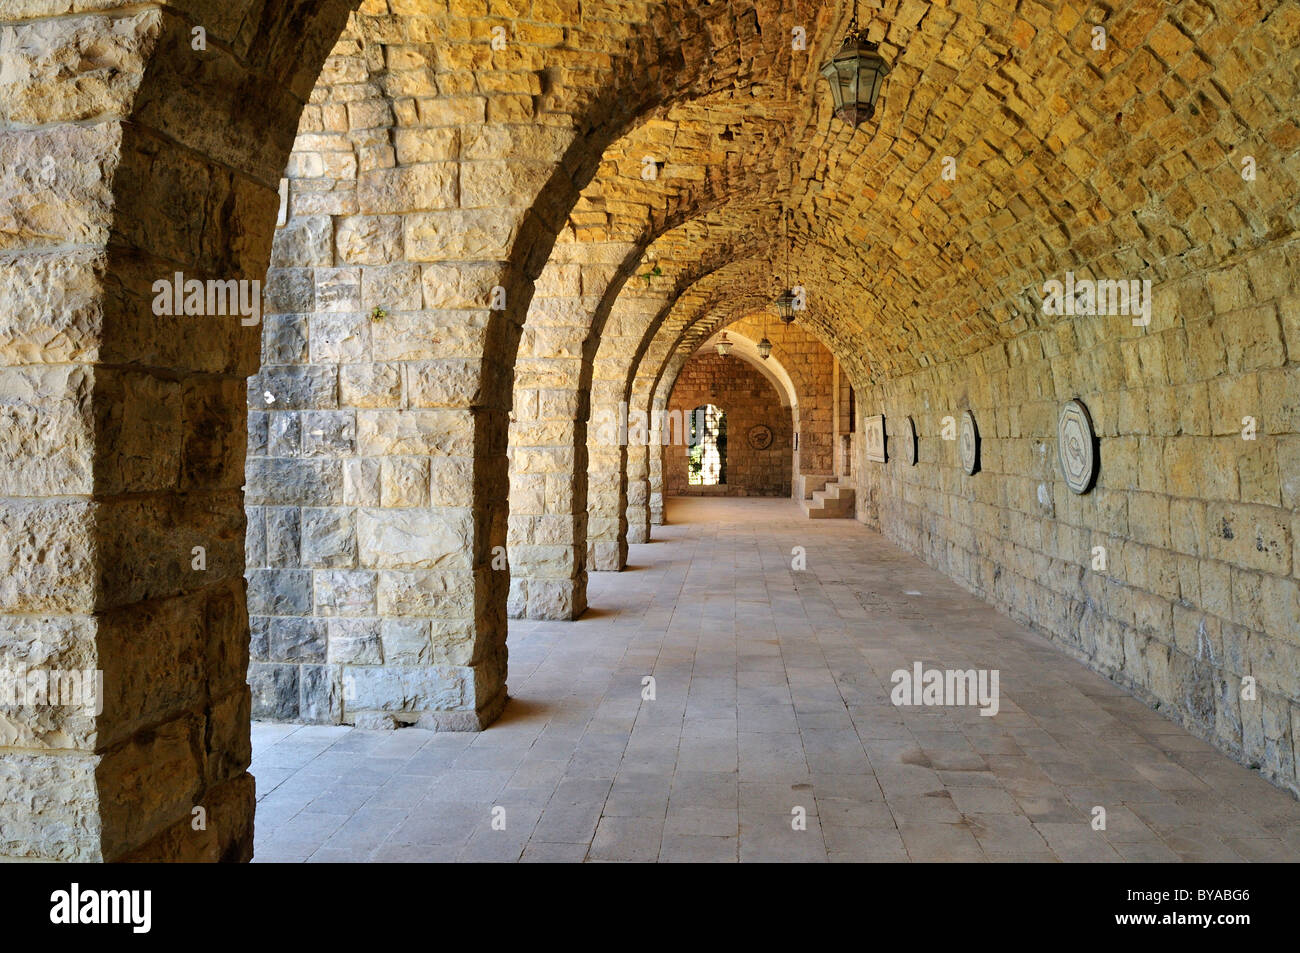 Vaulted ceiling with mosaic display at historic Beit ed-Dine, Beiteddine Palace of Emir Bashir, Chouf, Lebanon, Middle East Stock Photo